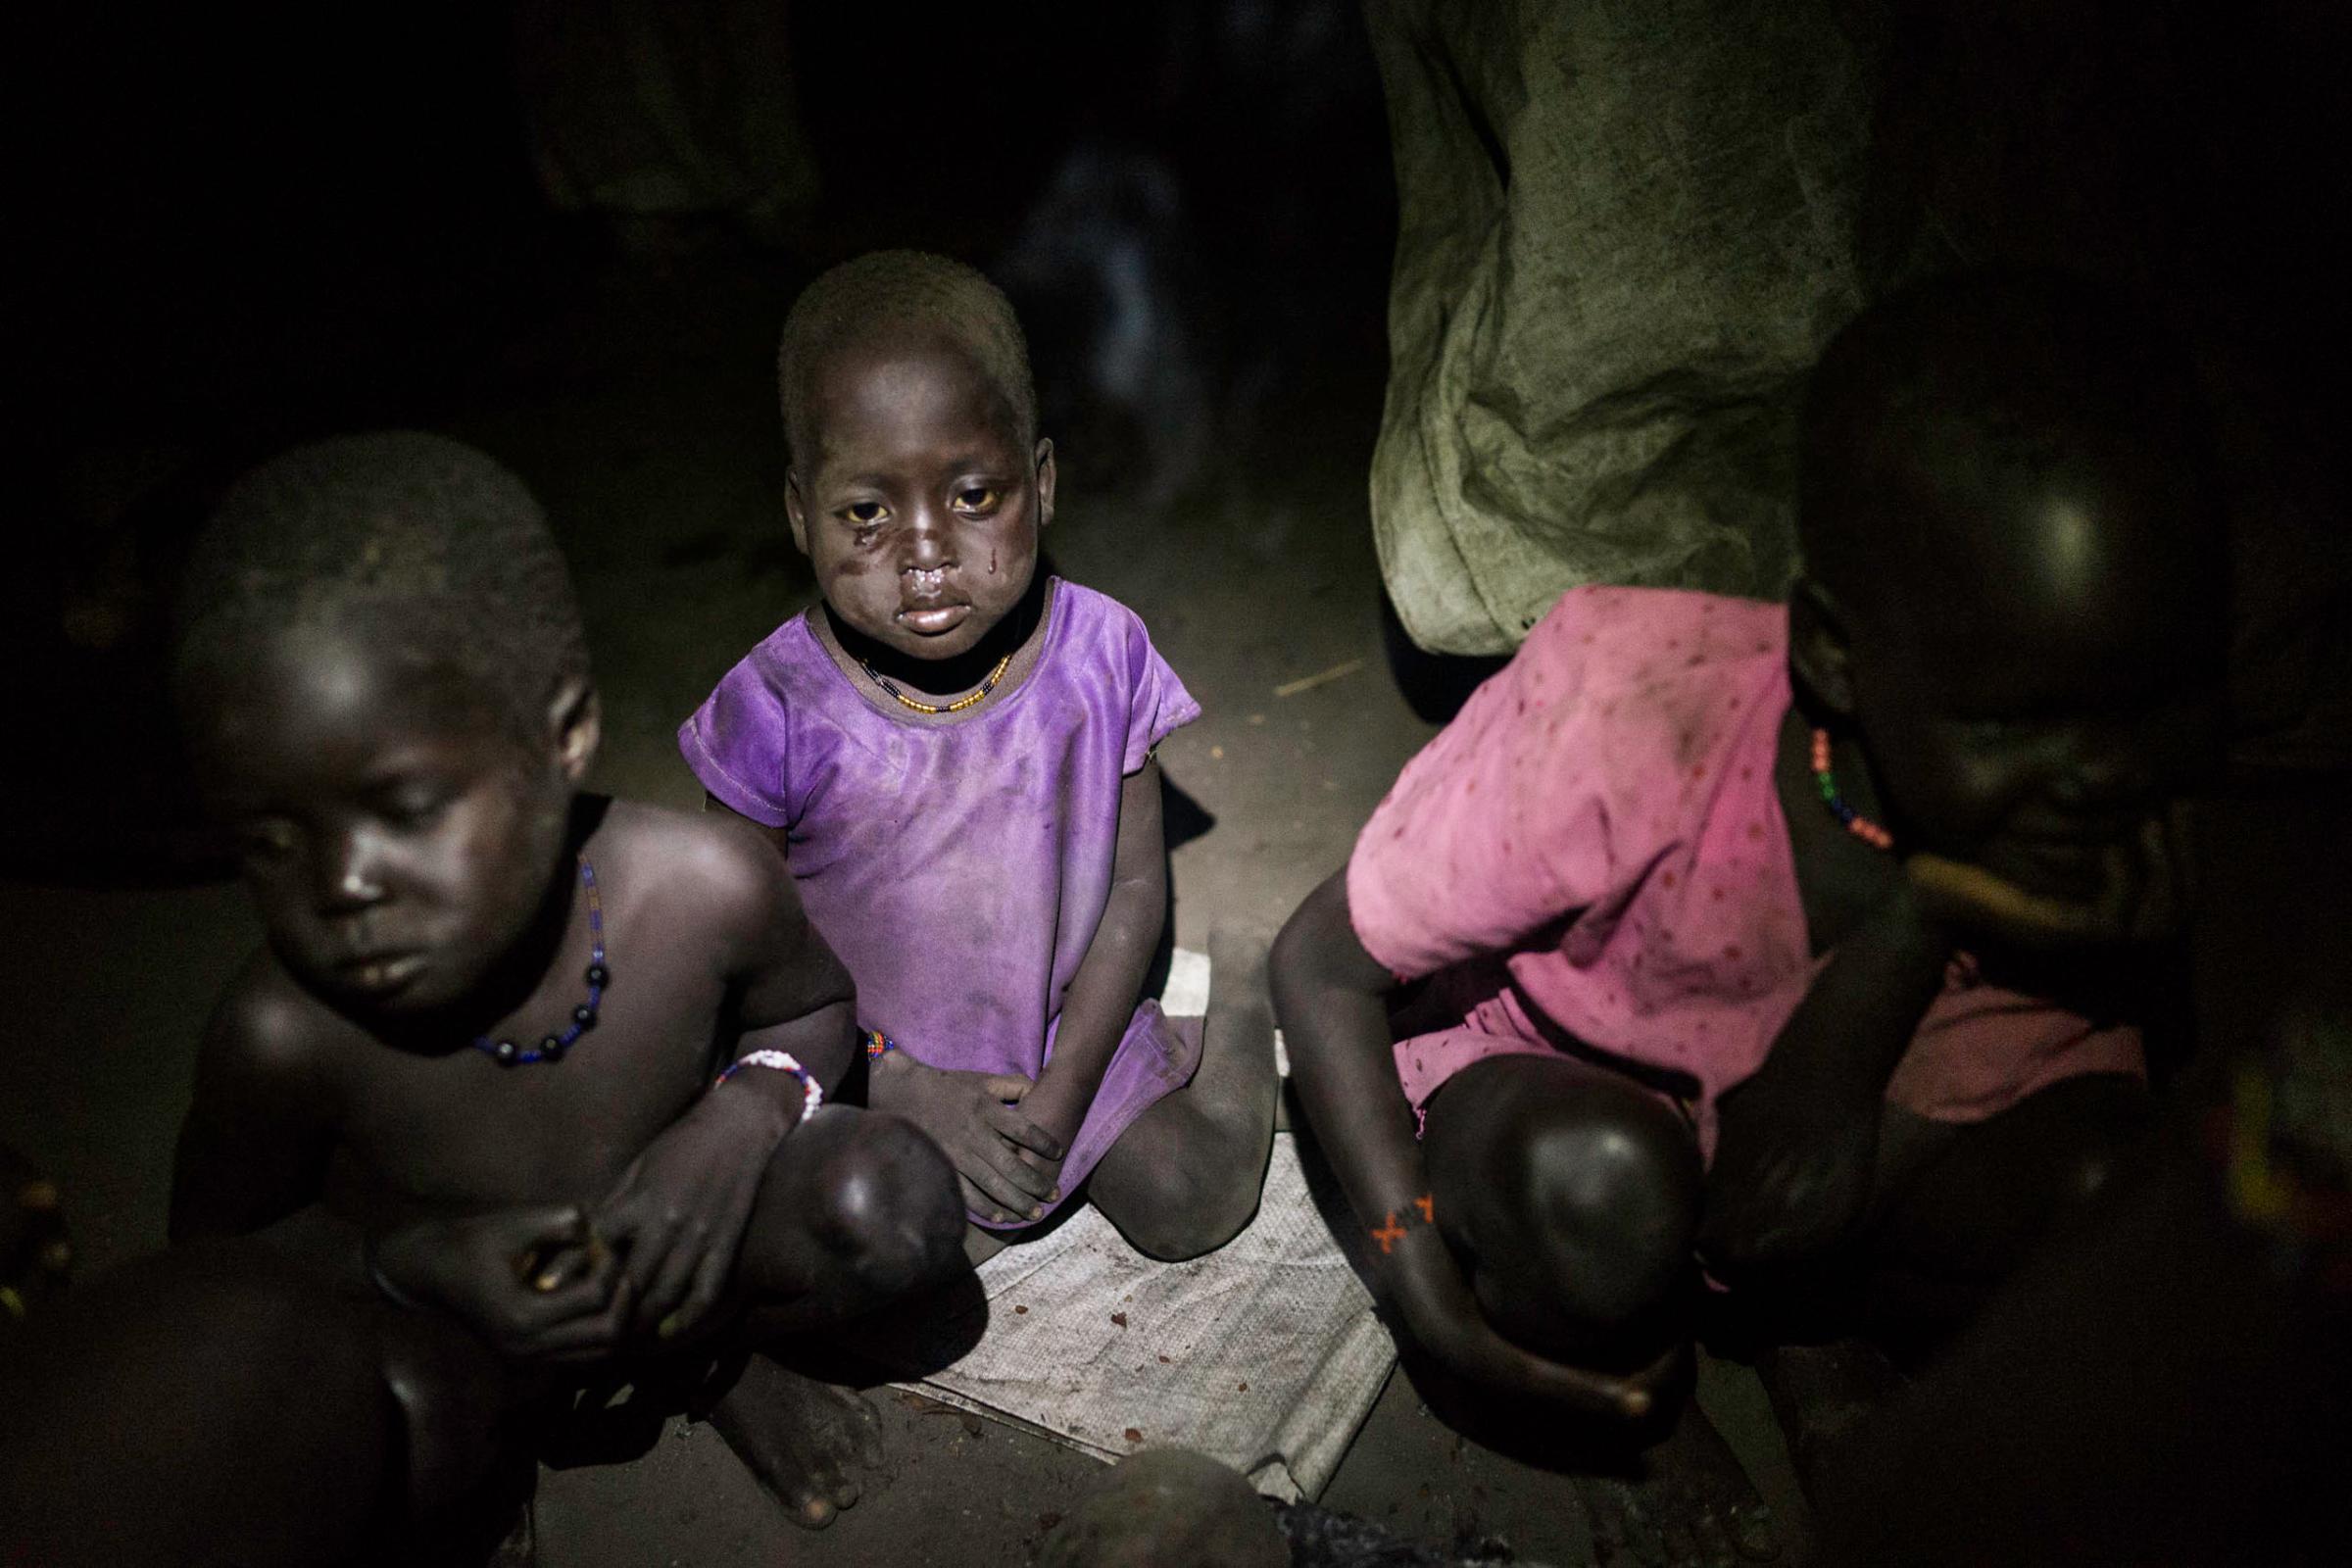 A child cries after walking through the cold swamps at night after collecting long awaited food distribution, Kok Island, Unity State, South Sudan.